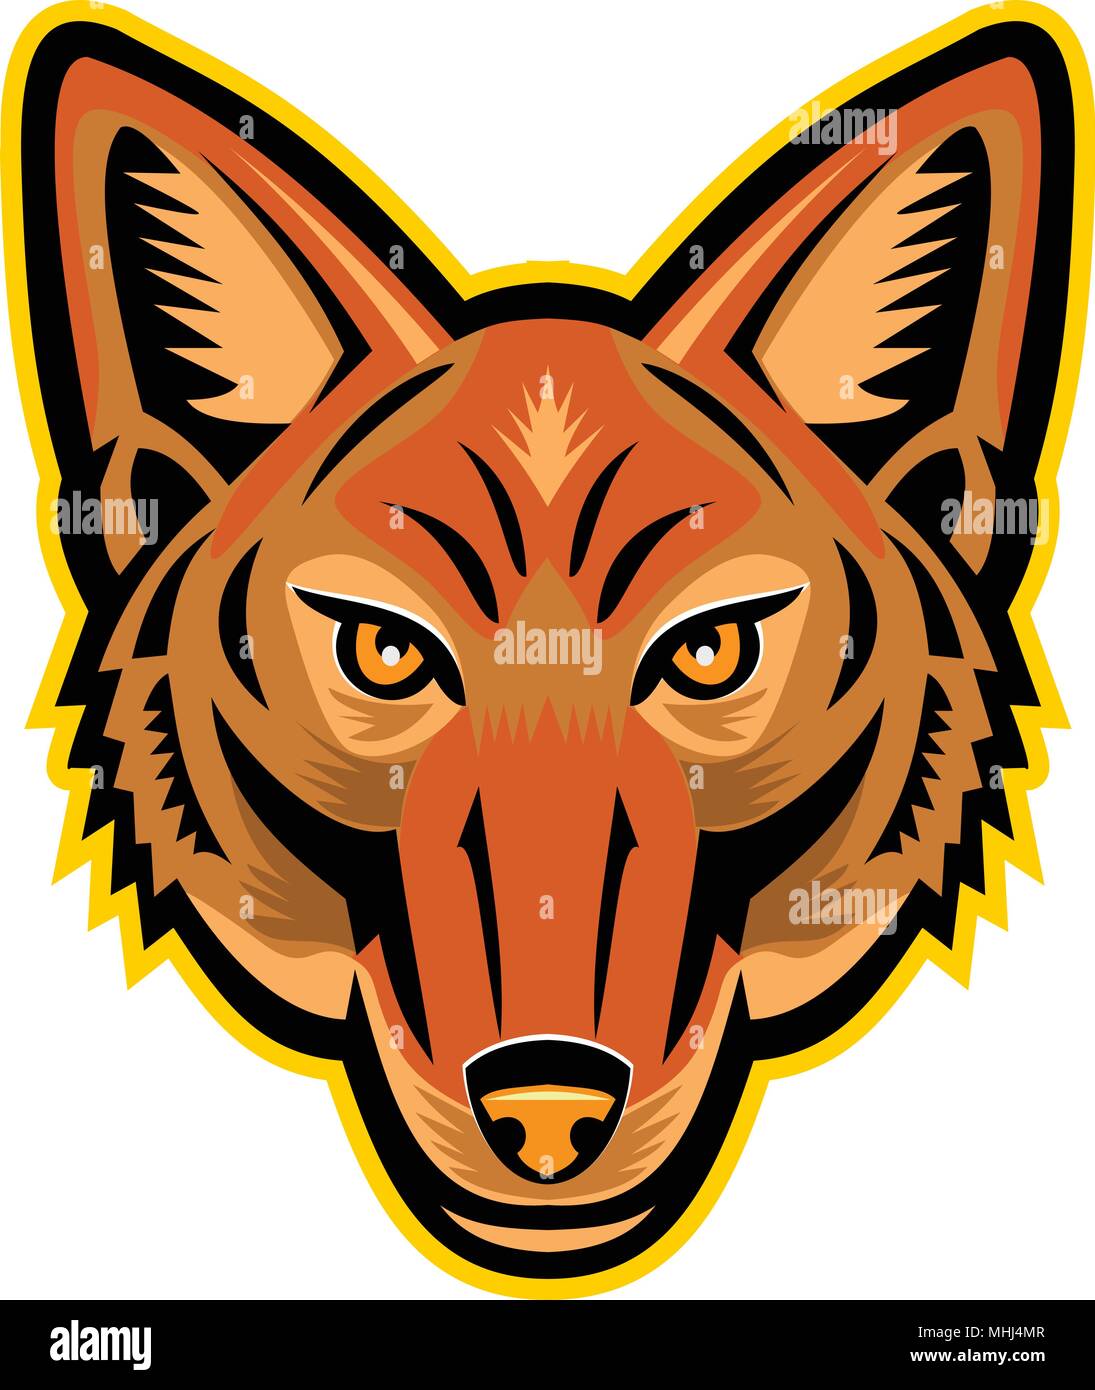 Mascot icon illustration of head of a Jackal or sometimes called American jackal  viewed from front on isolated background in retro style. Stock Vector